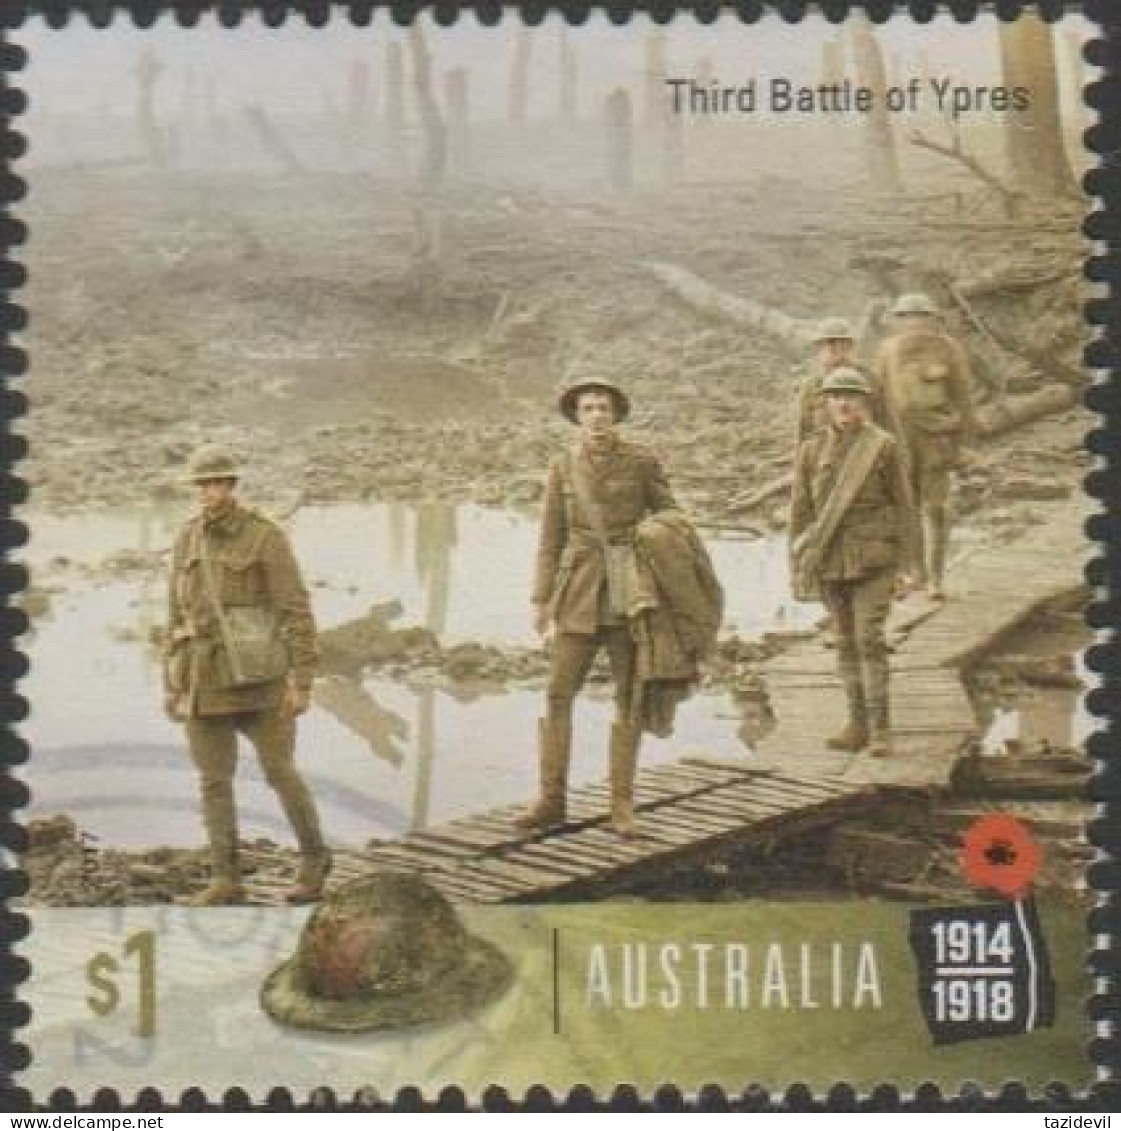 AUSTRALIA - USED 2017 $1.00 Centenary Of WWI: 1917 Third Battle Of Ypres - Soldiers - Used Stamps